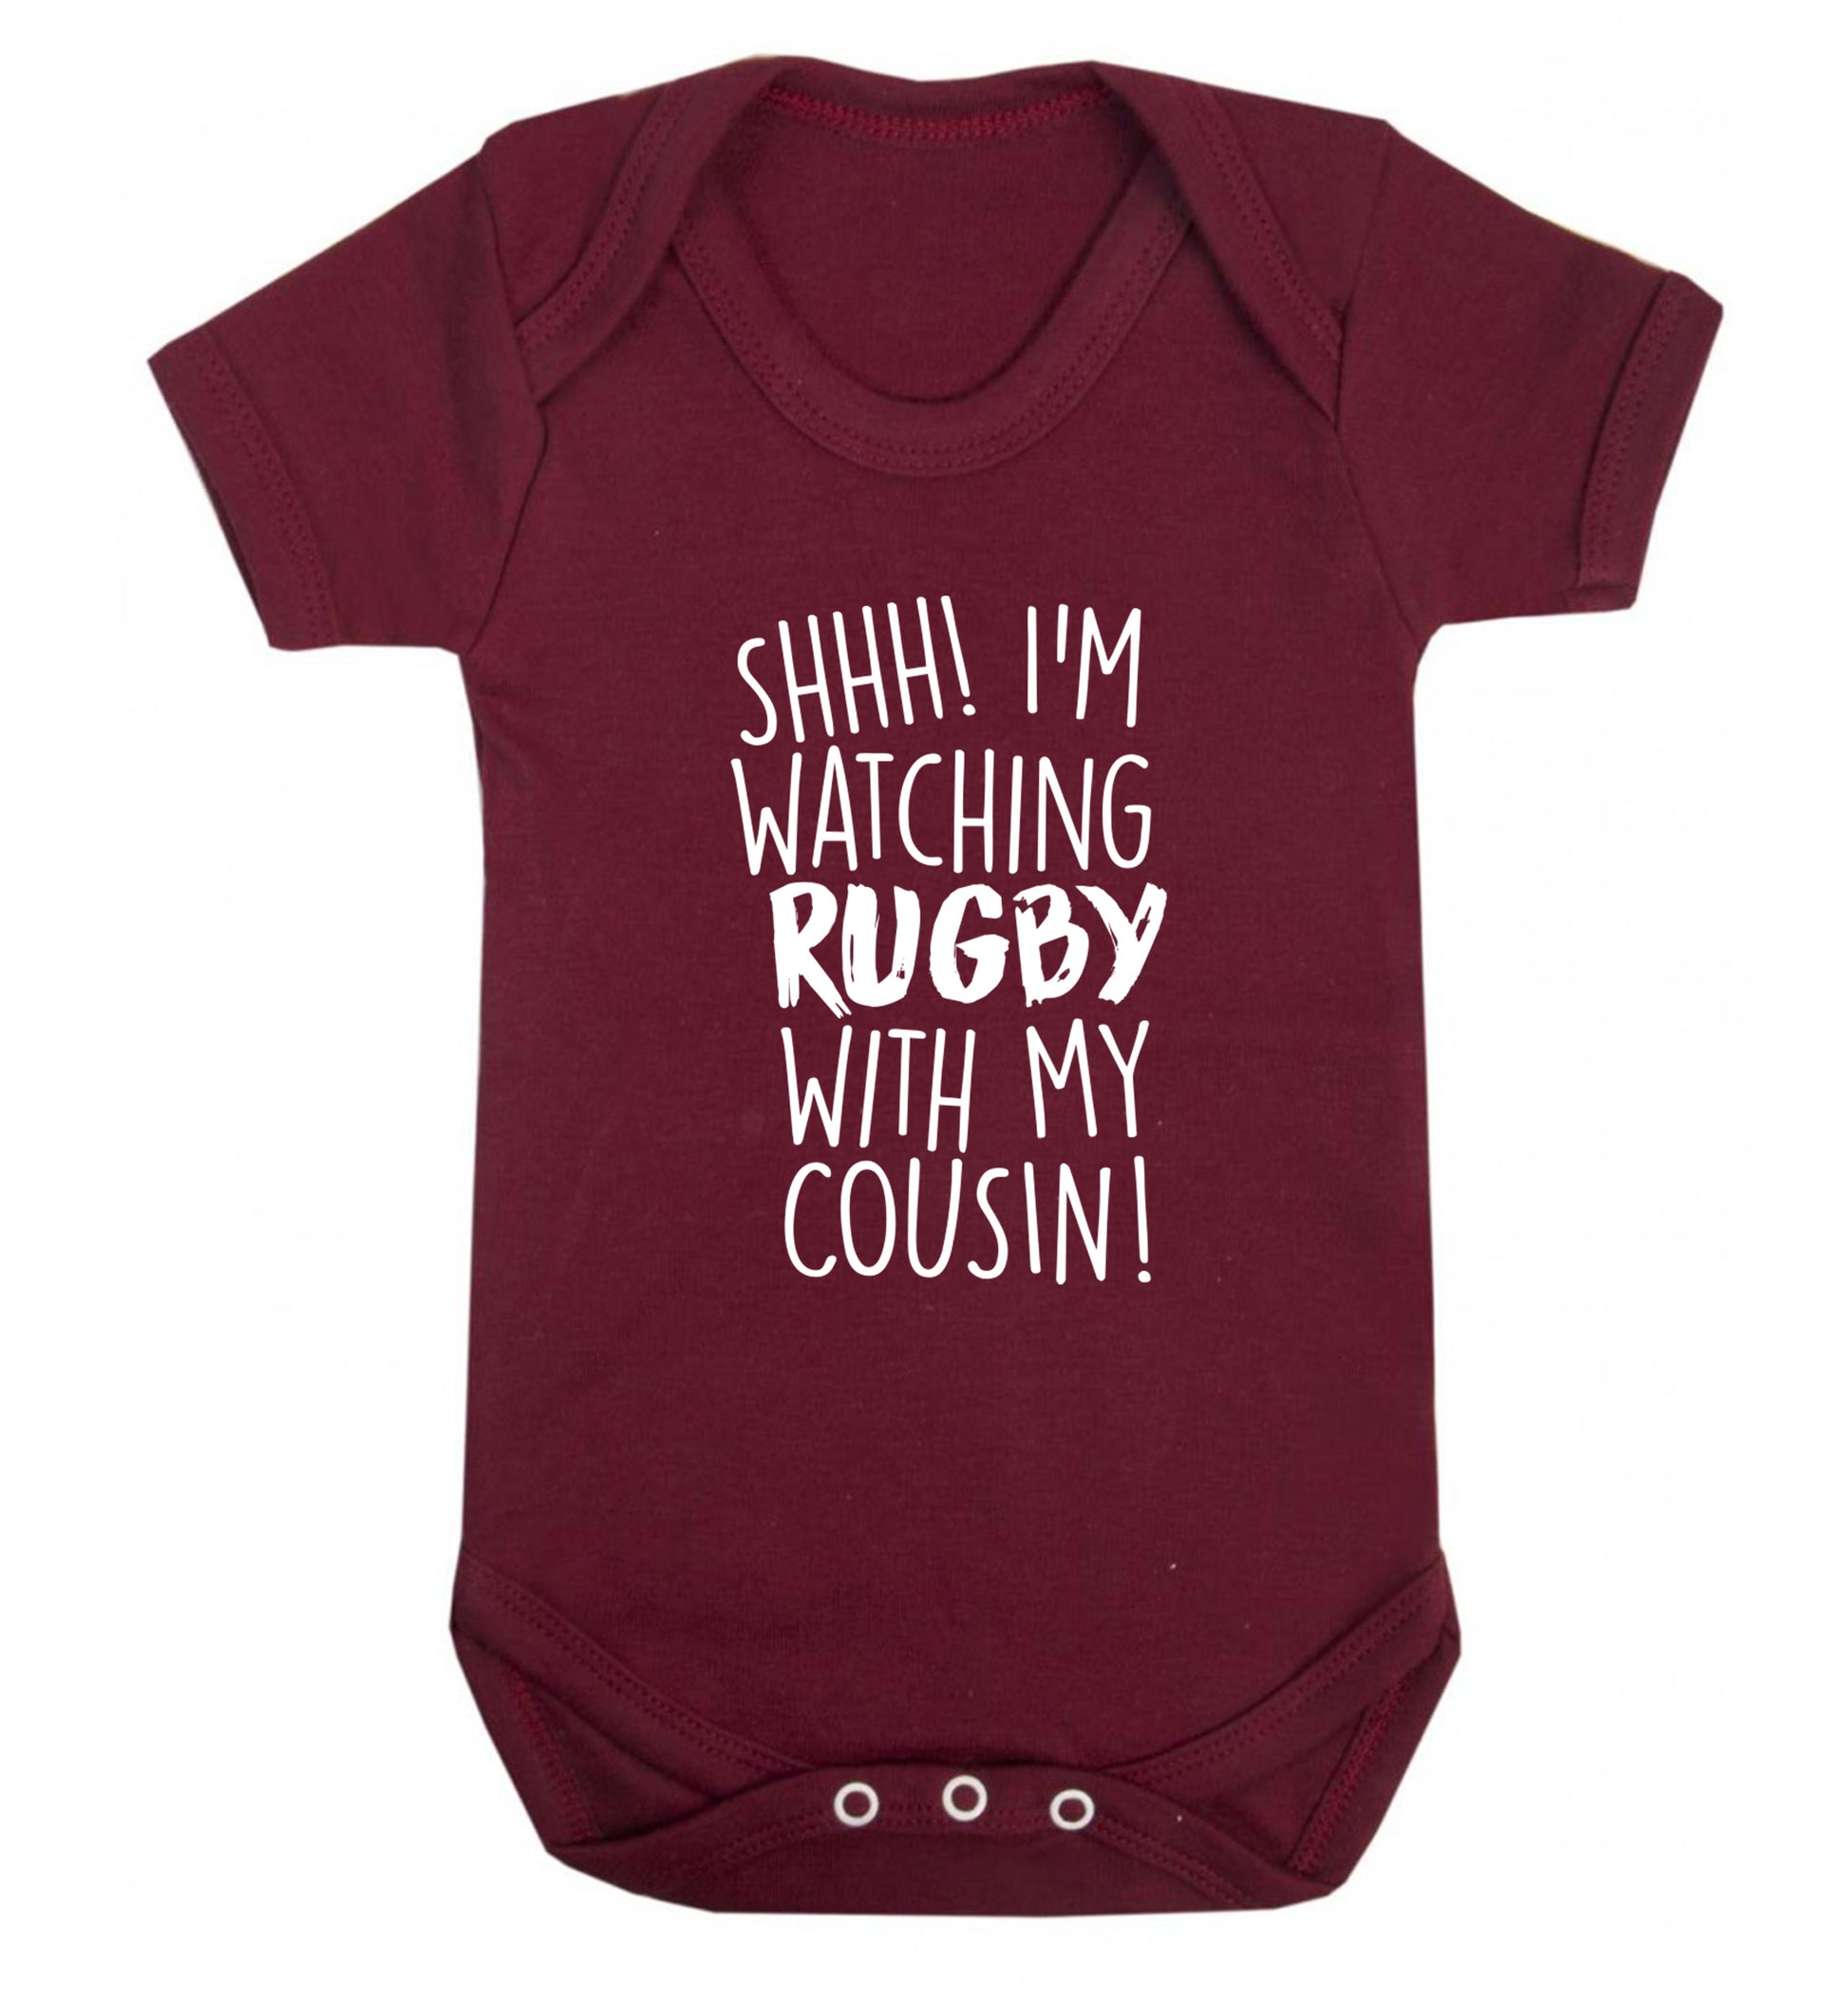 Shhh I'm watching rugby with my cousin Baby Vest maroon 18-24 months